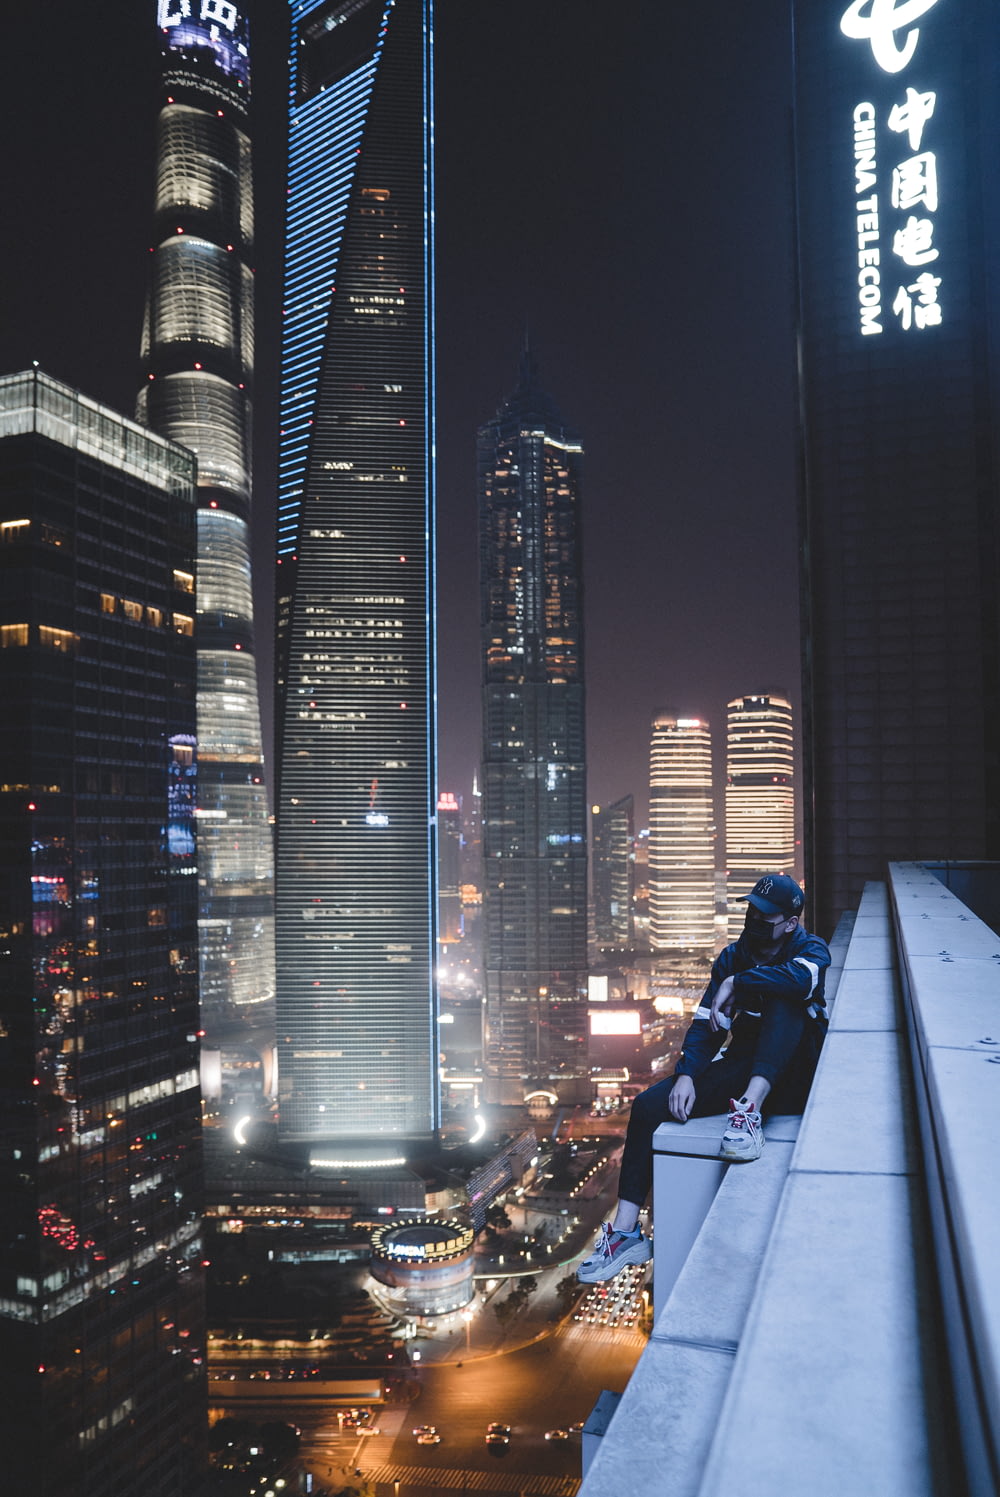 man sitting on building gutter during nighttime